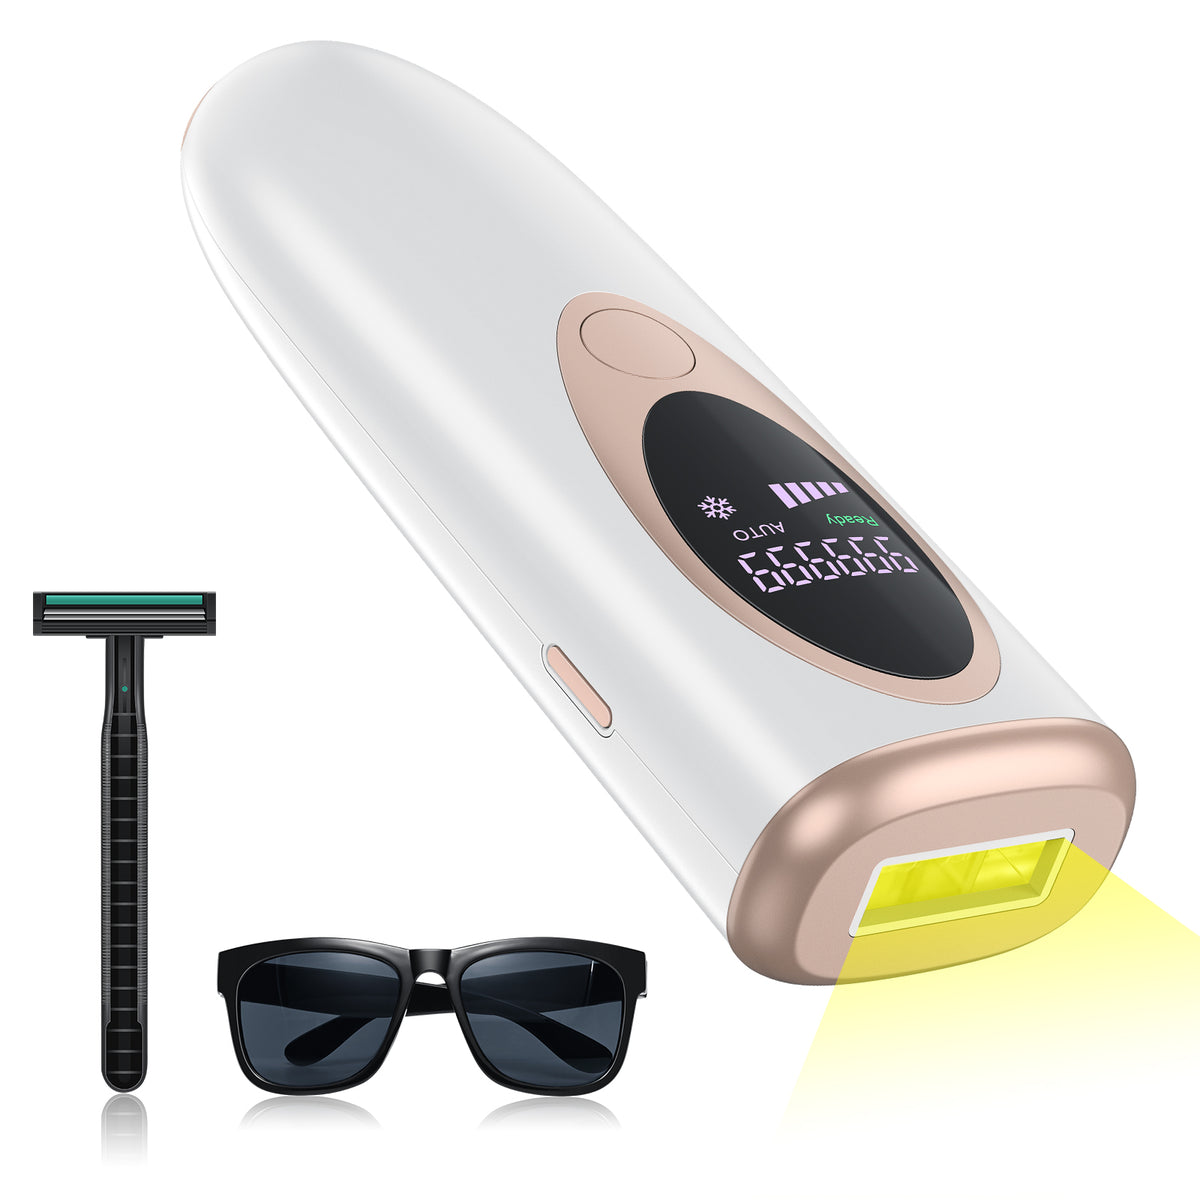 MaidenTouch - IPL Hair Removal Handset